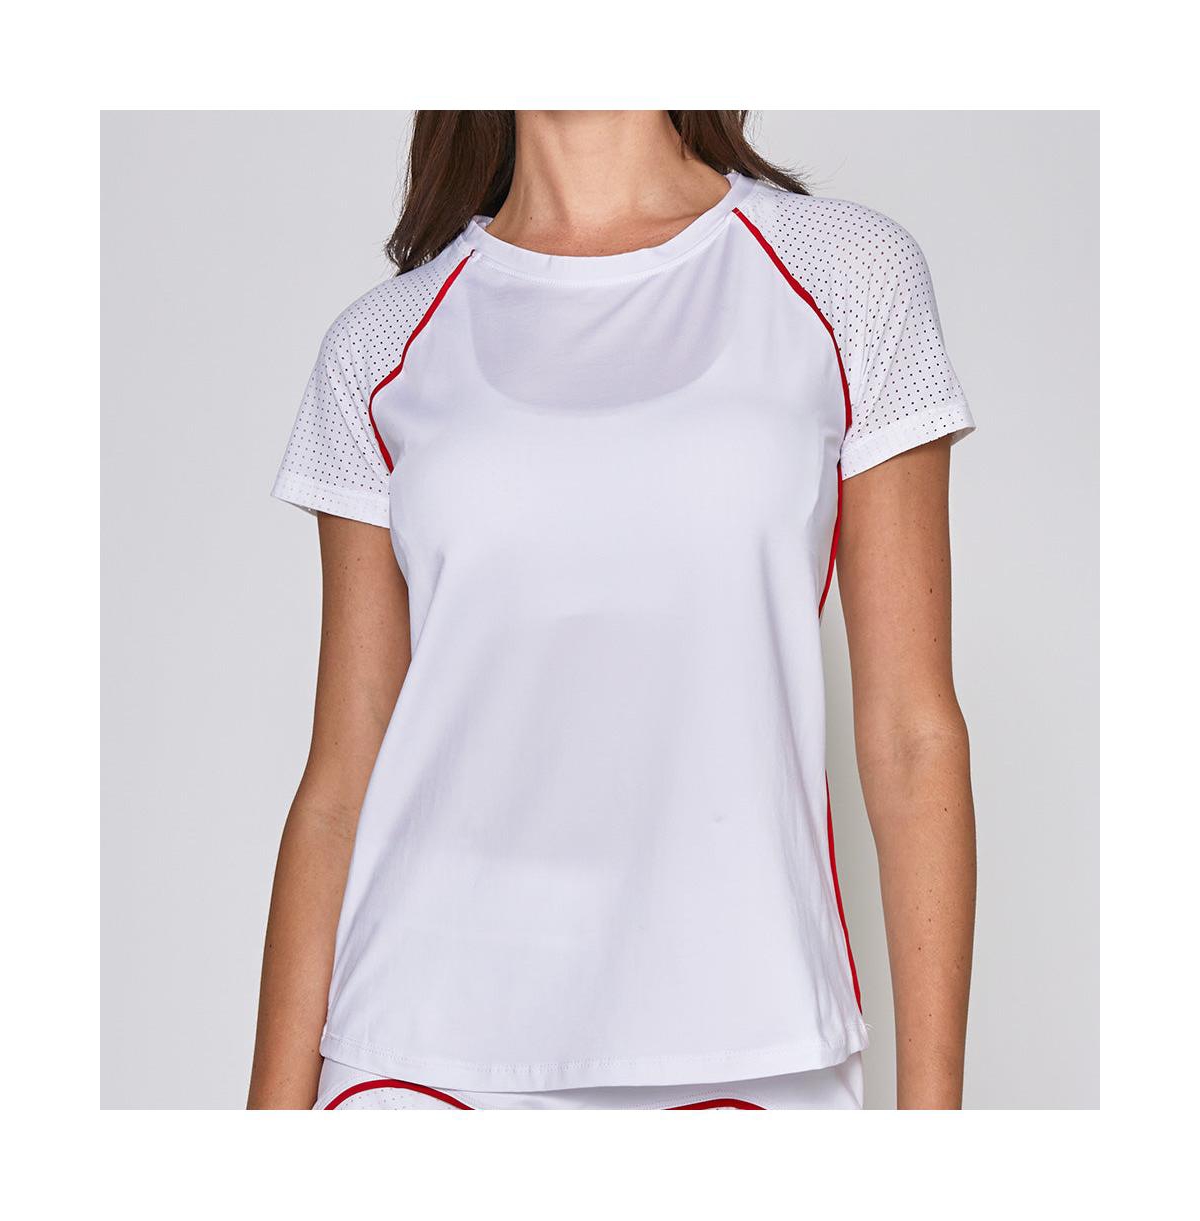 Women's Performance Short Sleeve Tee - White with red trim